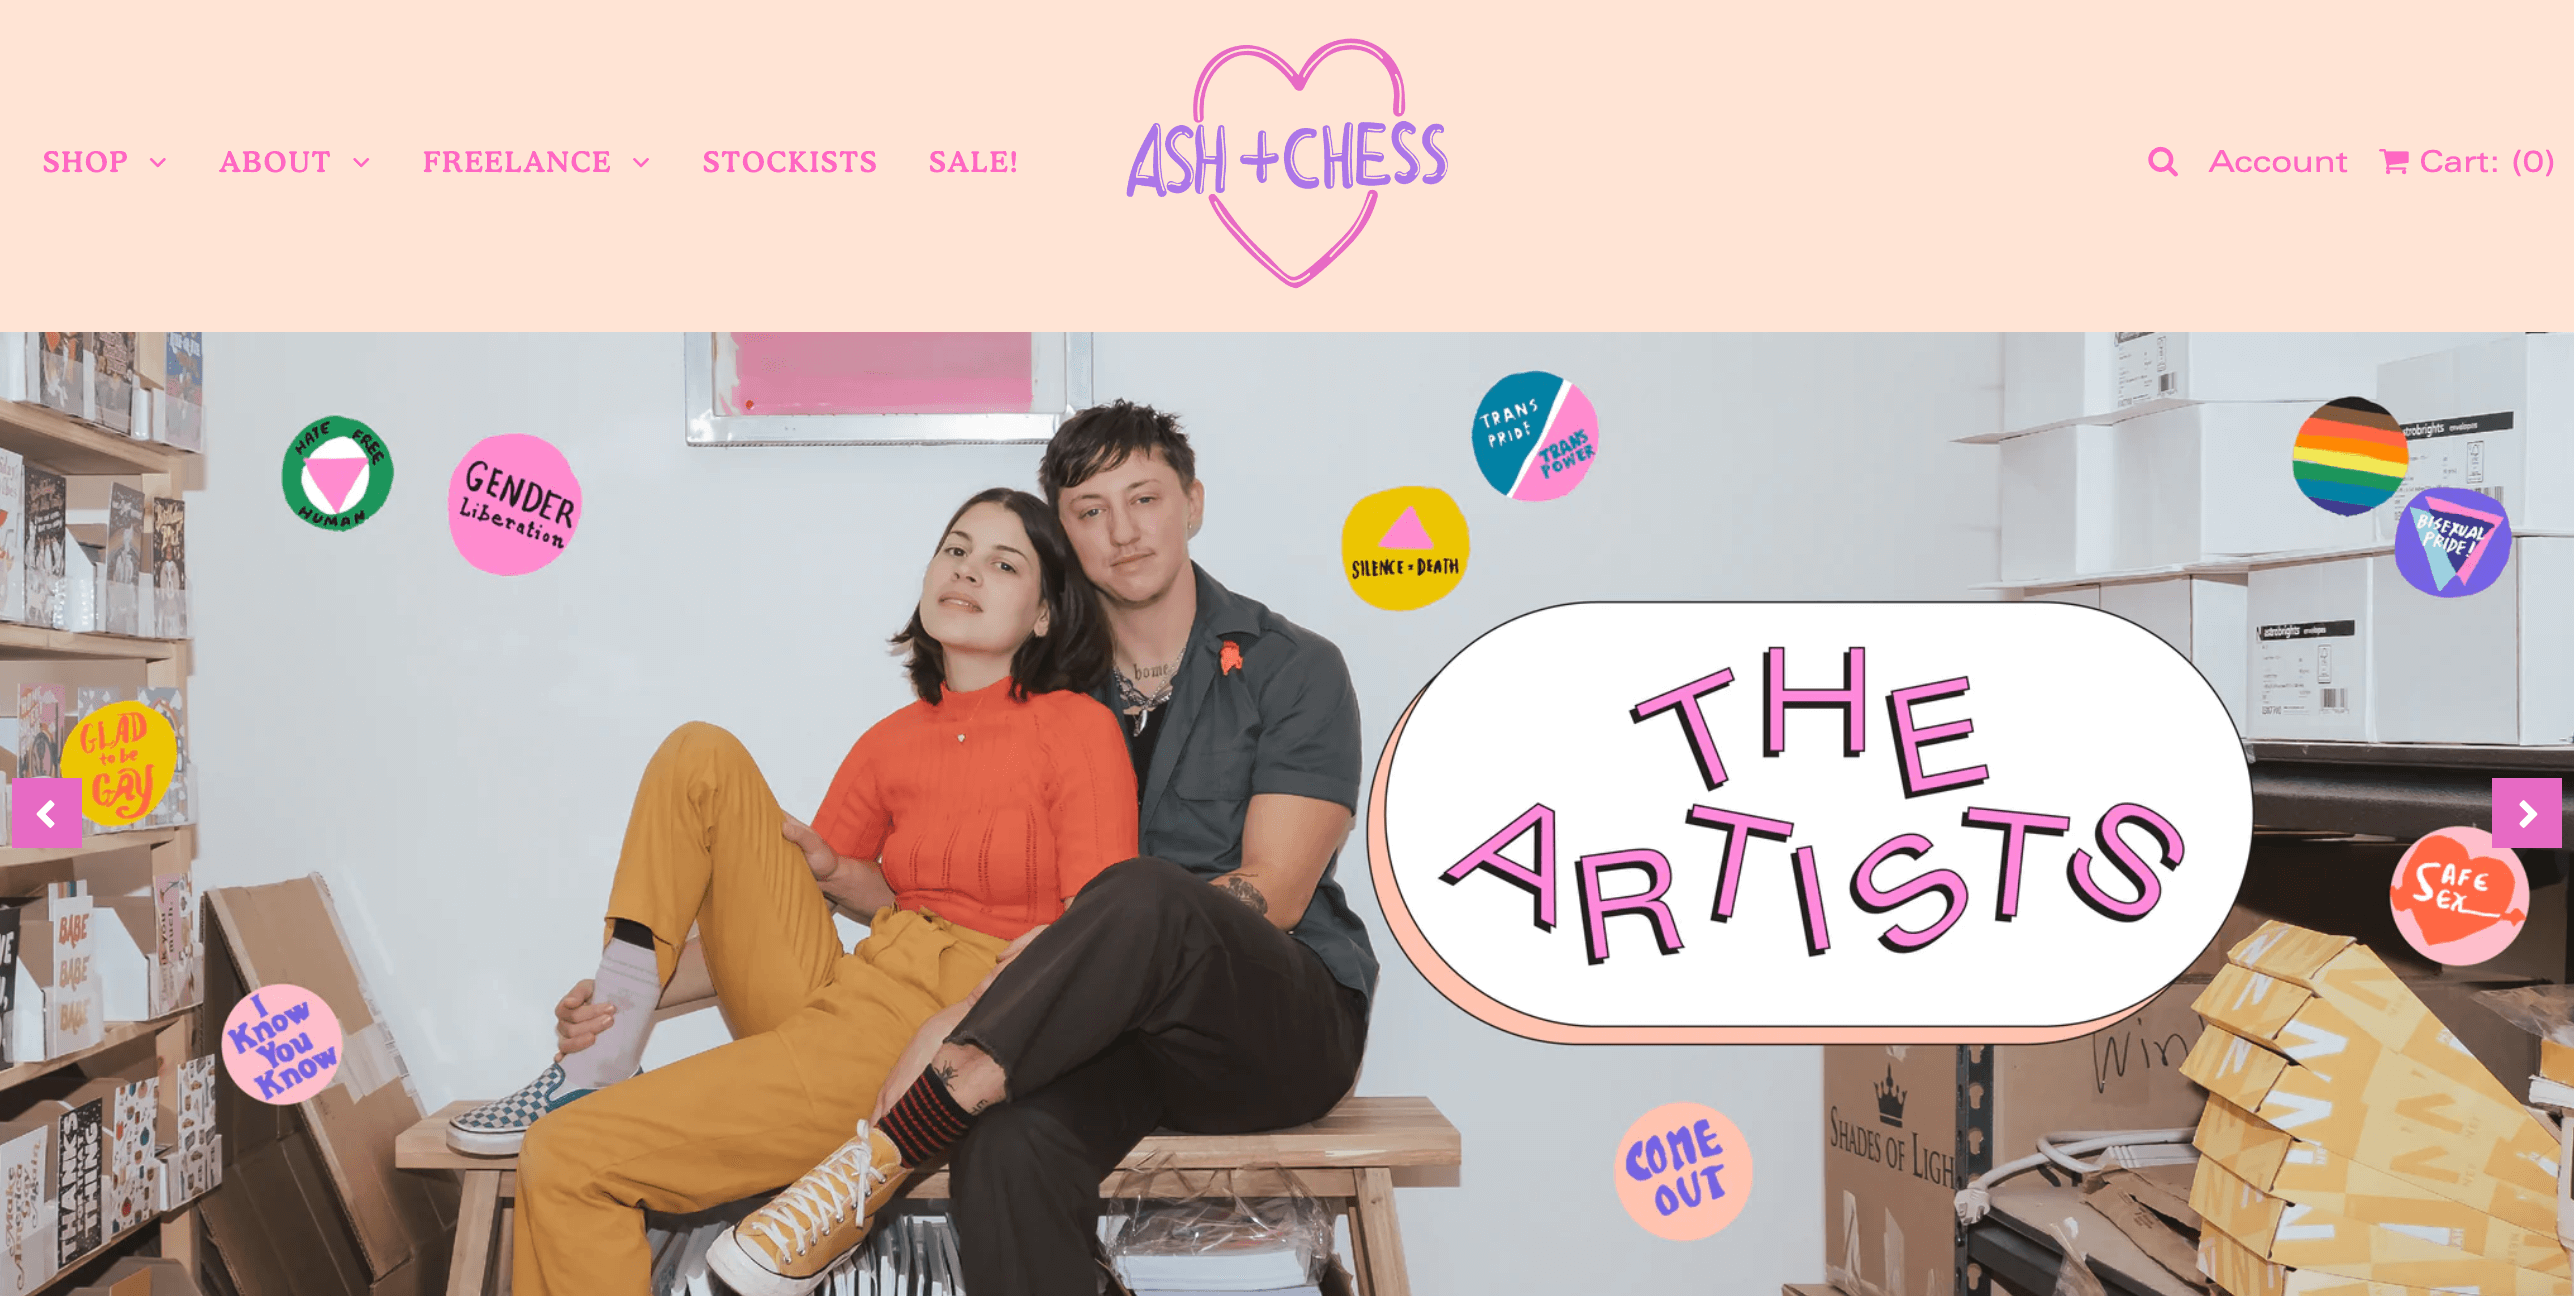 A screenshot from the Ash + Chess homepage. The image shows an image of Ash and Chess entwined on a bench together in their studio. The title is in a retro, bright color font and says The Artists and there are various graphic icons overlaying the image with LGBTQIA+ positive messages such as: come out, I know you know, glad to be gay, gender liberation, and more.